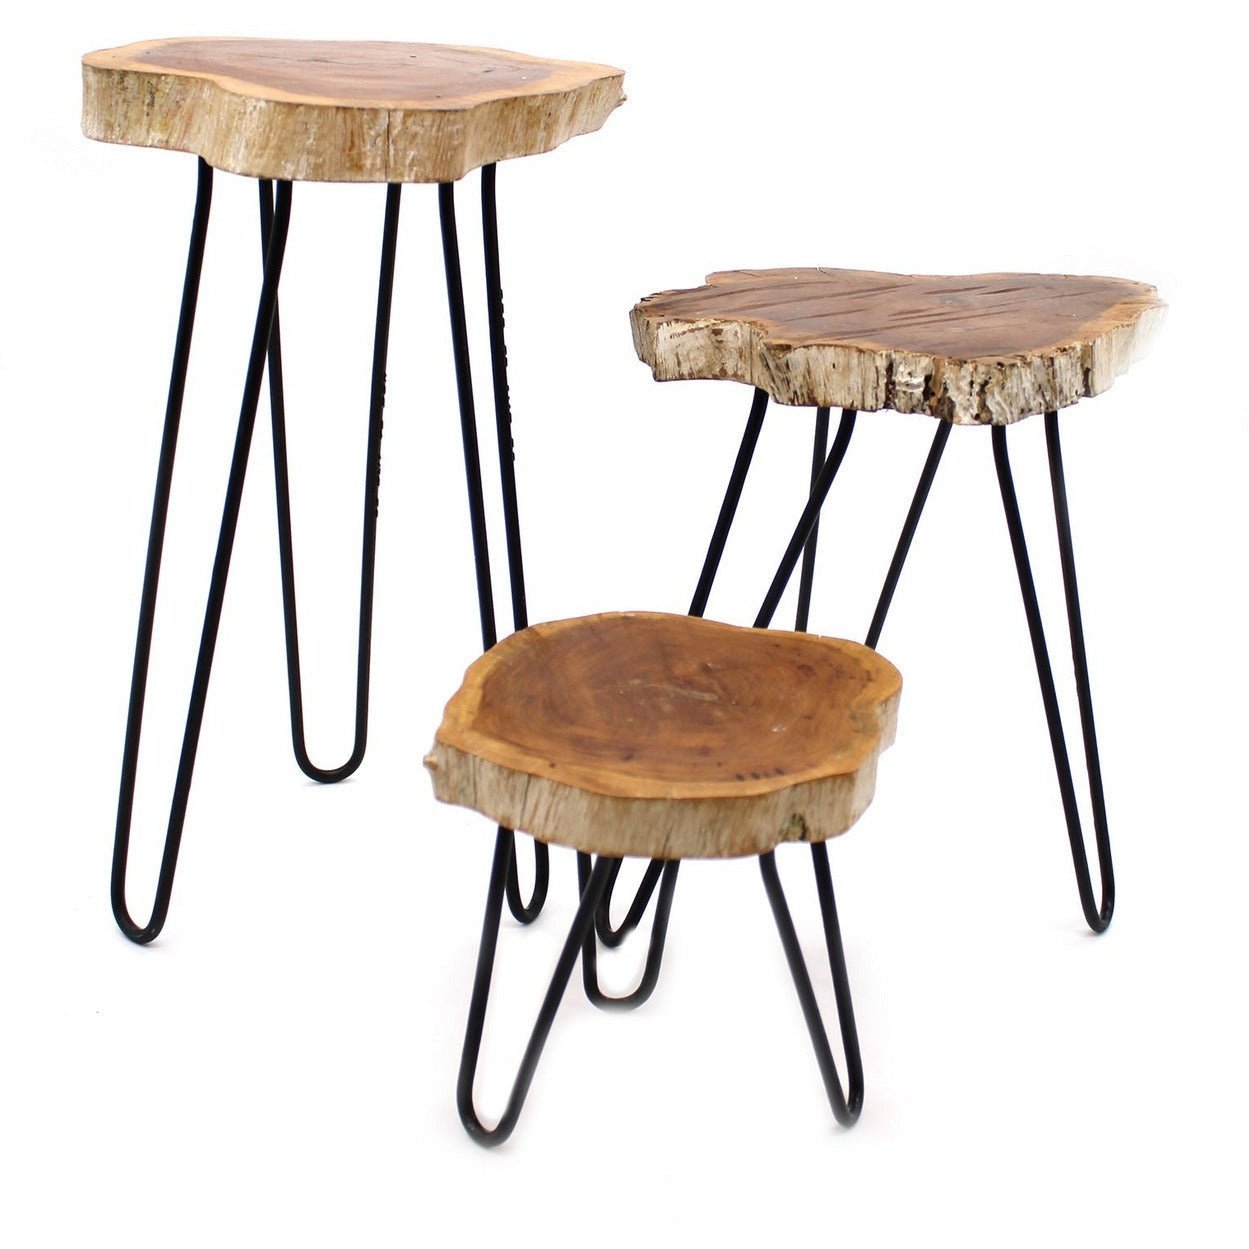 Set of 3 Wood Plant Stands